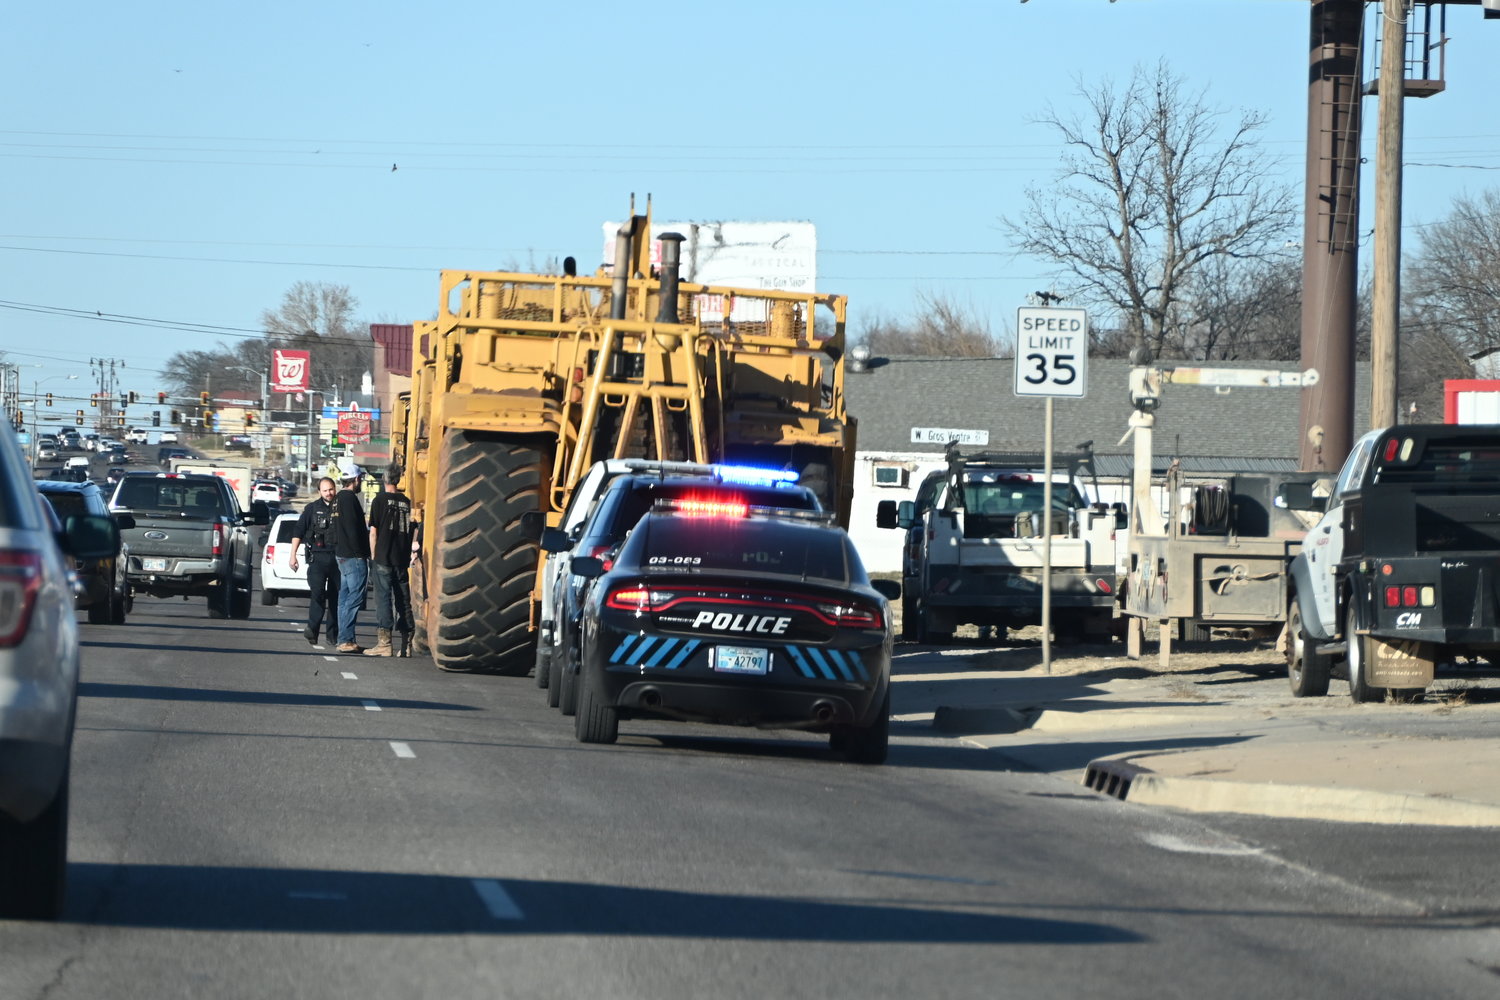 Purcell Police and Fire units were called to the scene in the 800 block of South Green Avenue last Thursday afternoon oil spilled from large industrial vehicles. Firefighters applied Sphag and oil dry to the spill area. There was also spillage on SH 39 under the I-35 bridge.